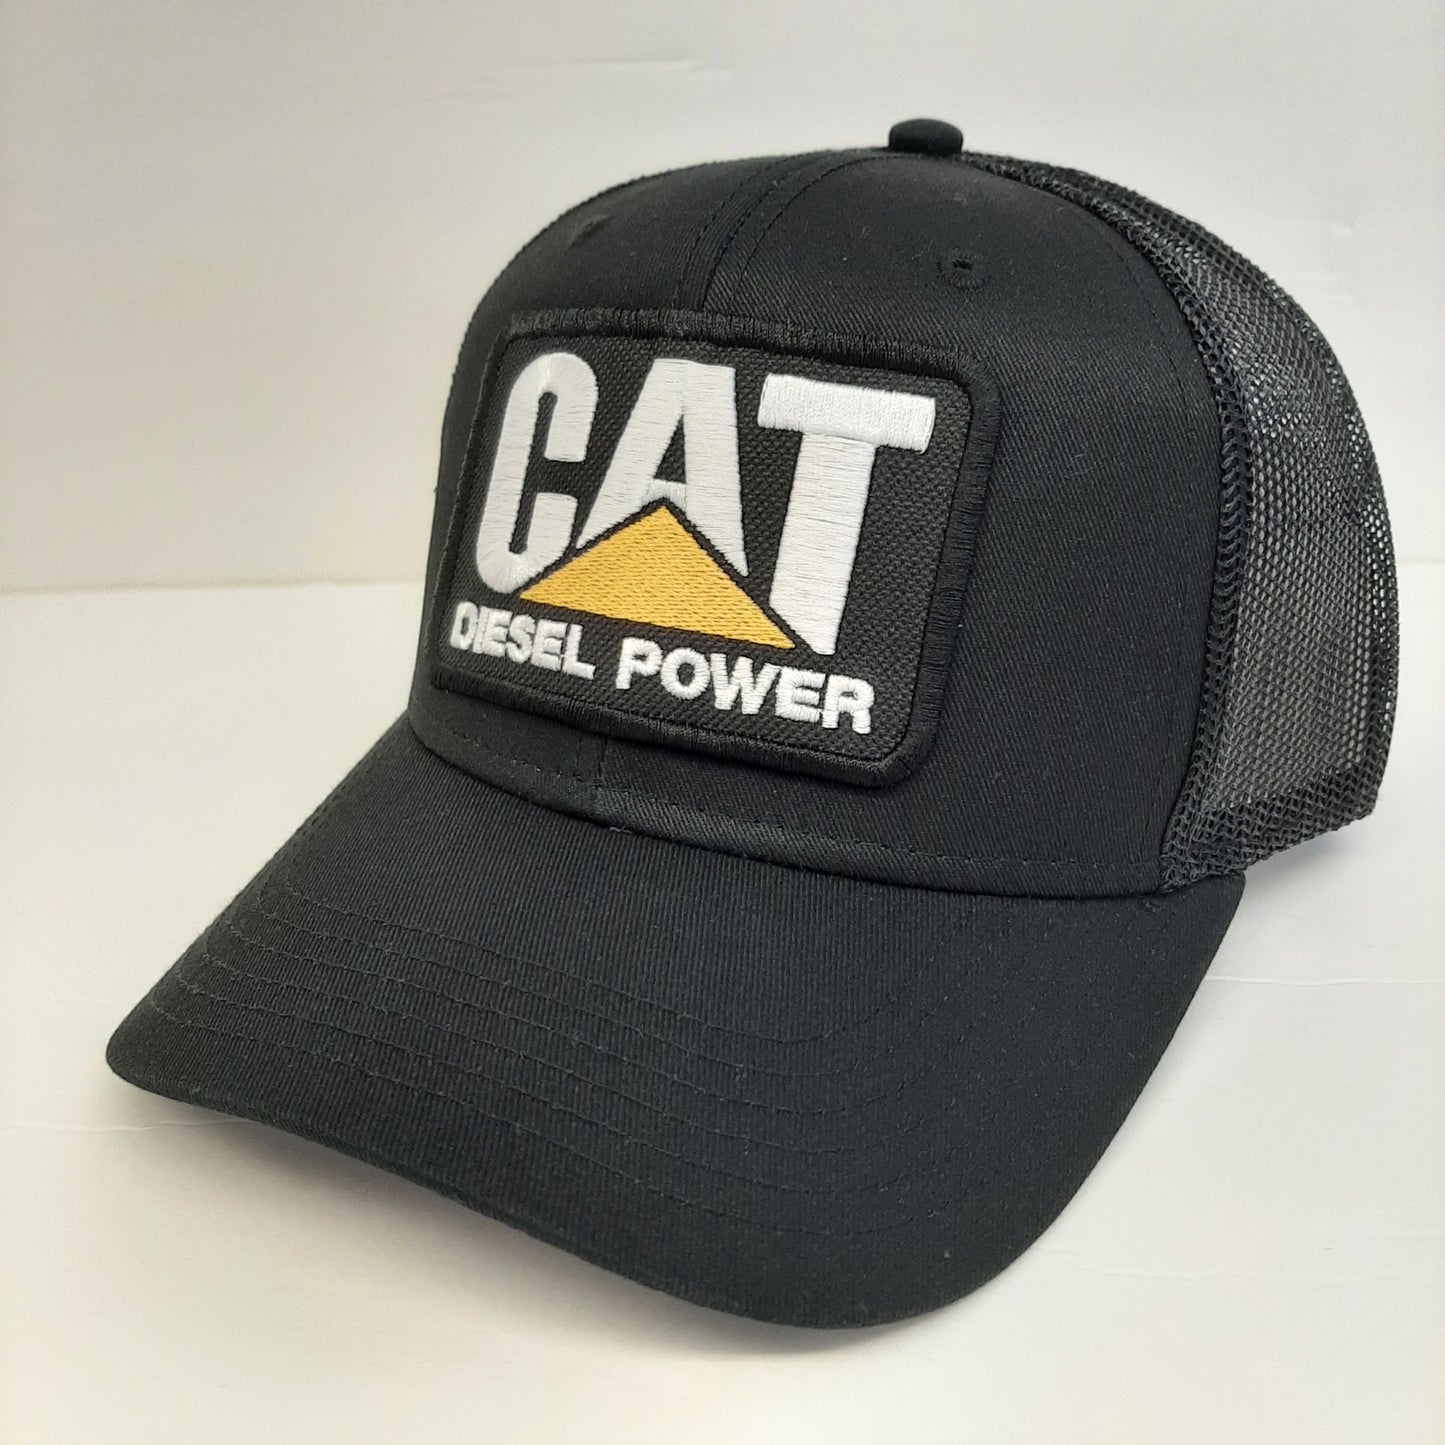 Otto Retro Cat Diesel Power Embroidered Patch Curved Bill Trucker Mesh Snapback Cap